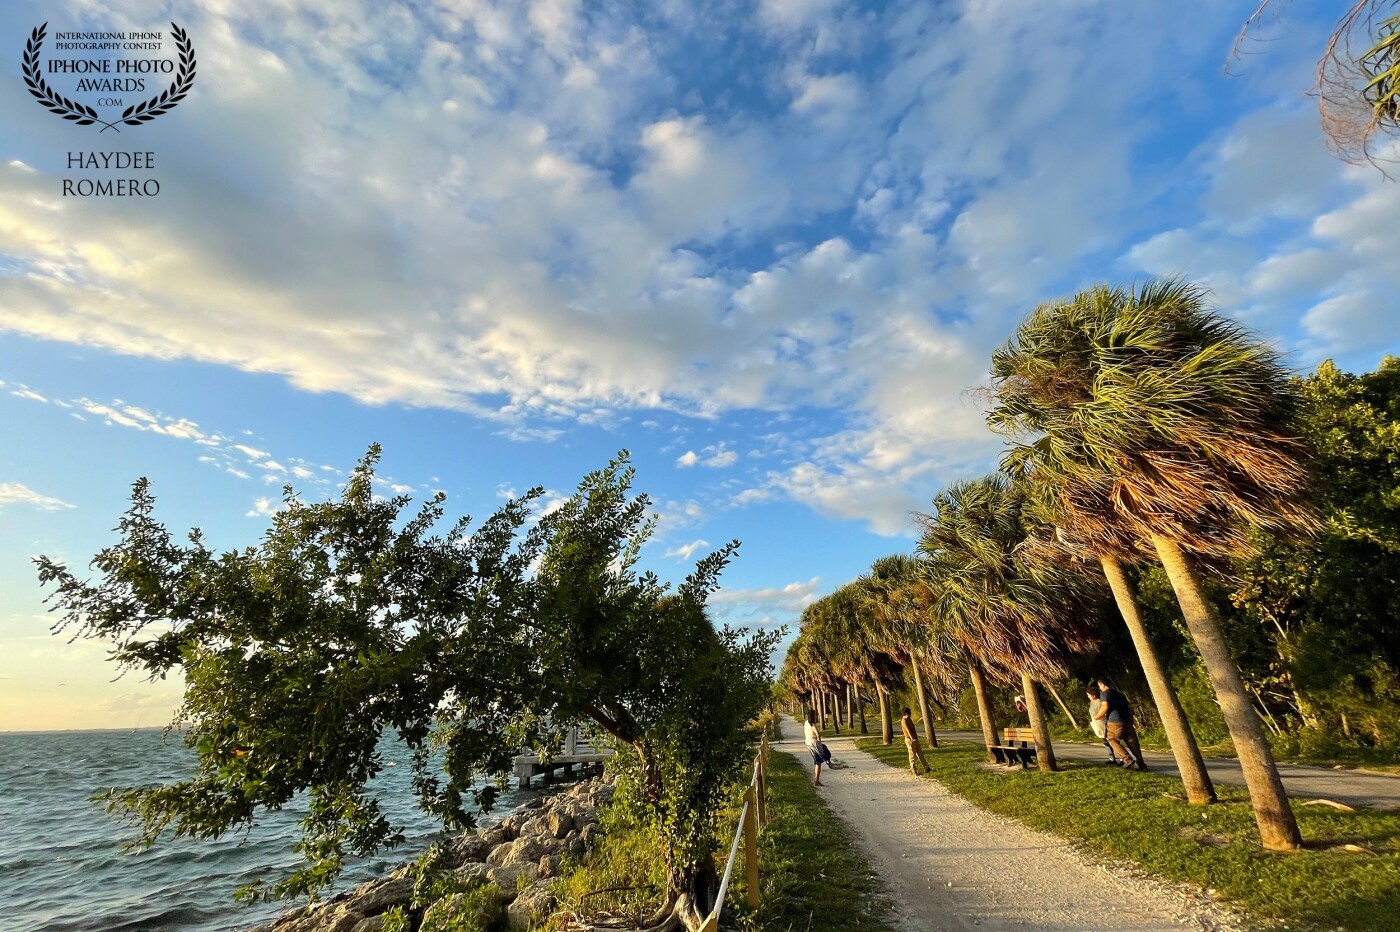 A family poses for photos on a pathway next to the water in Cape Florida state park on Key Biscayne, south Florida, while gusty winds bend the palms and send clouds rushing across the sky.